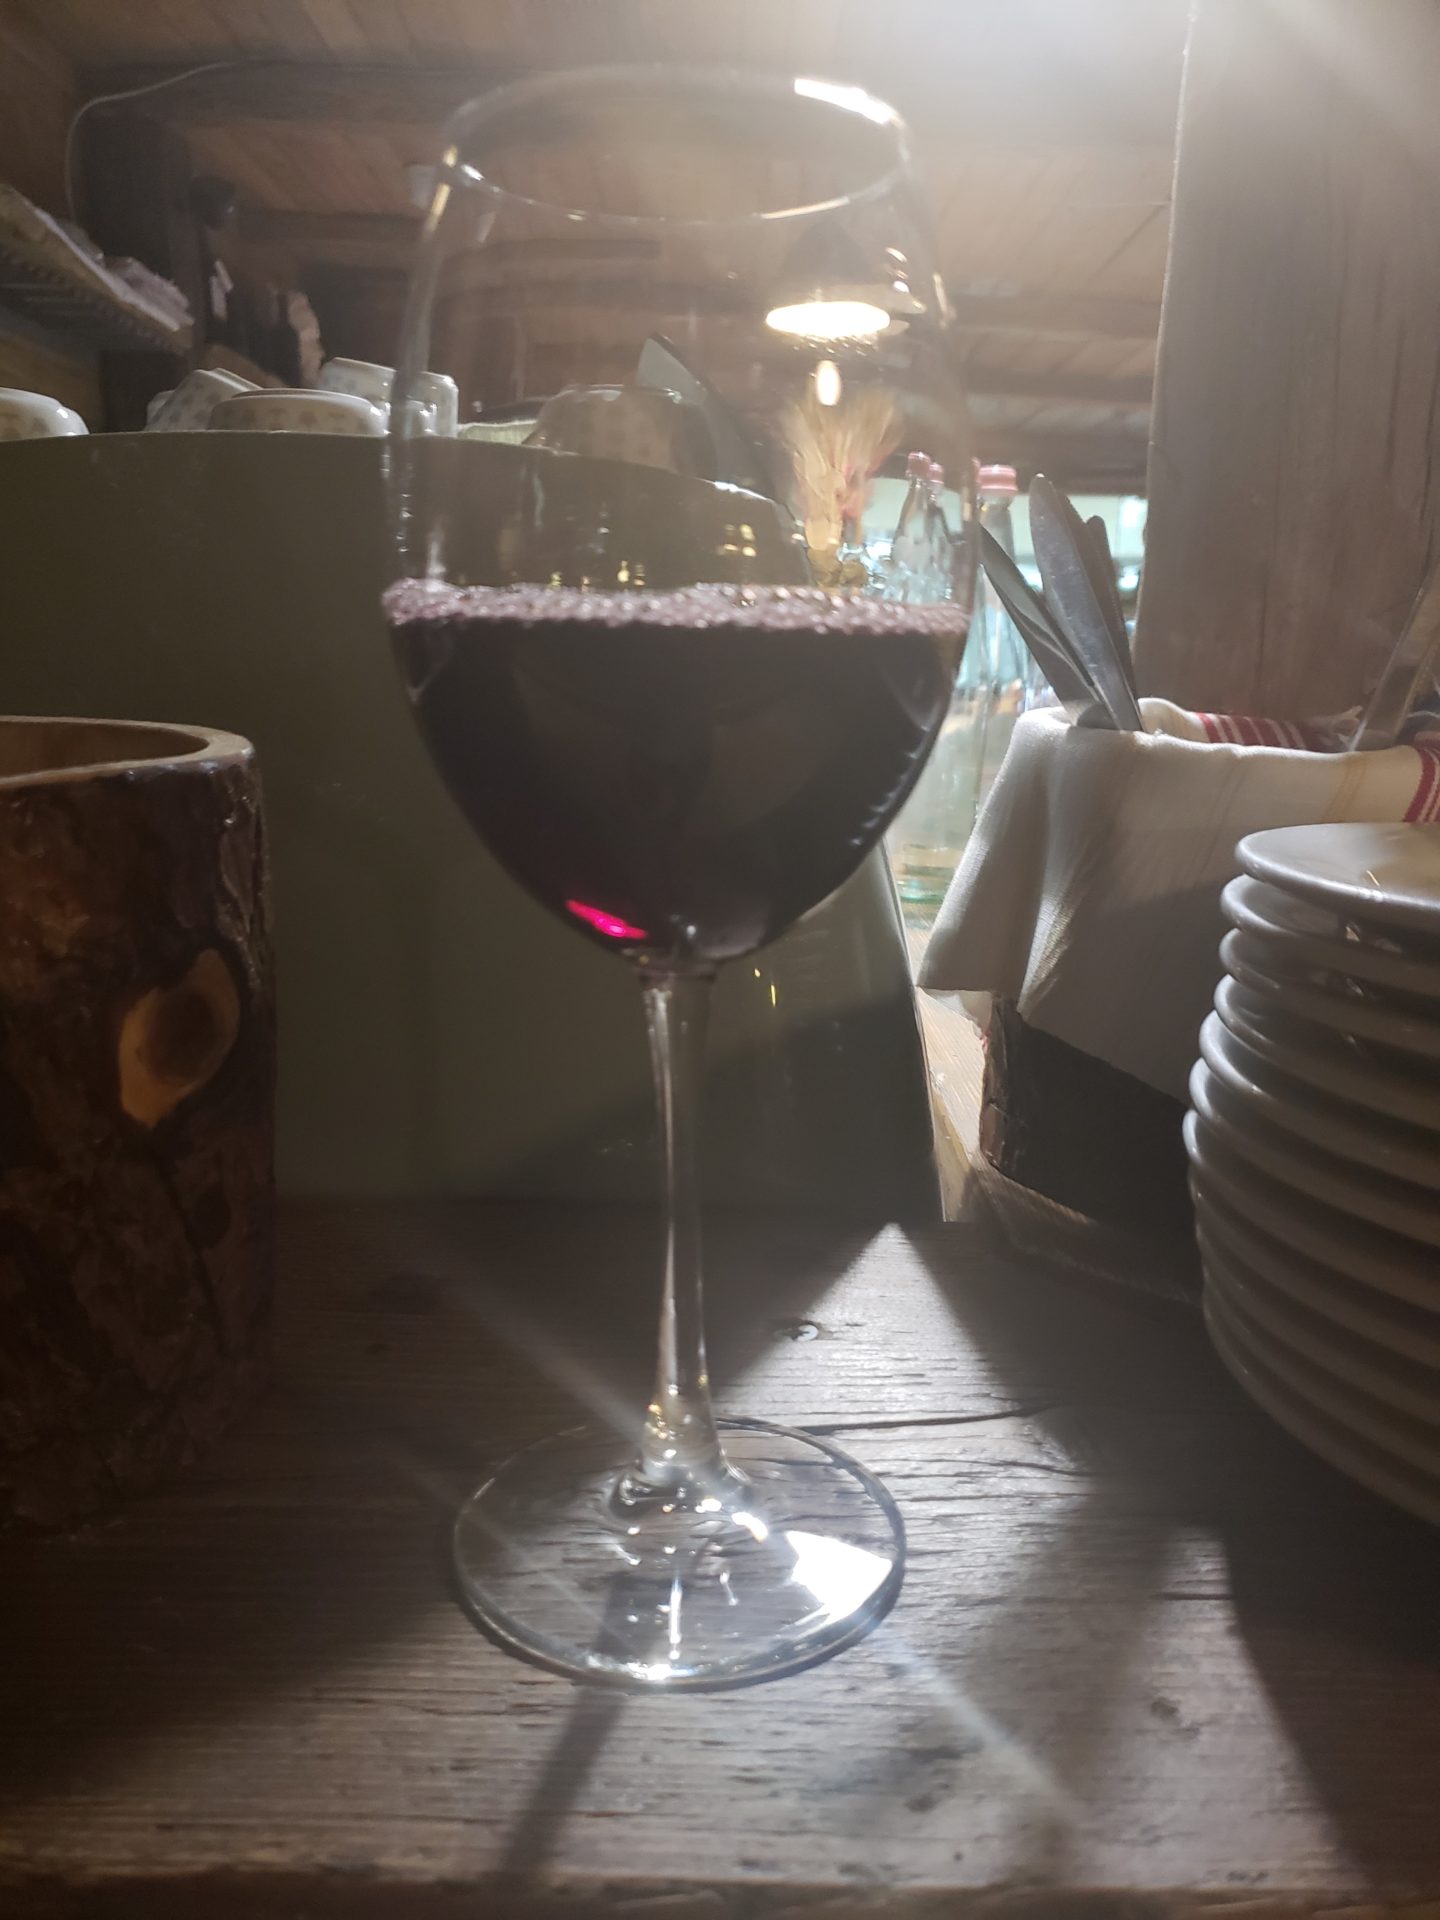 a glass of wine on a table